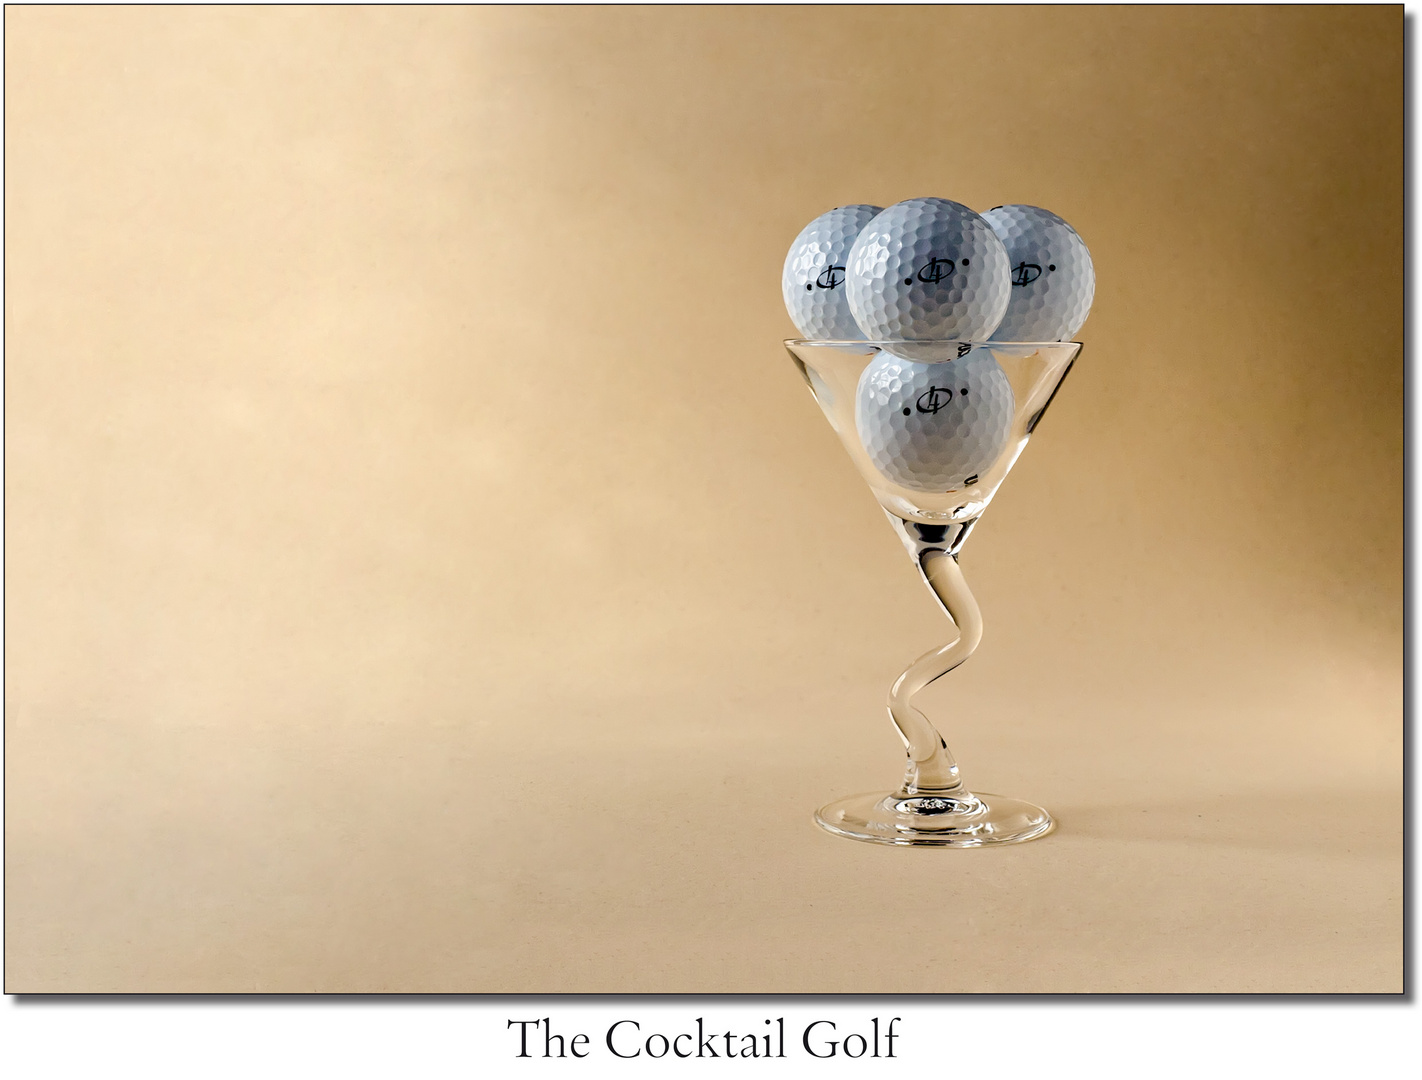 The Cocktail Golf